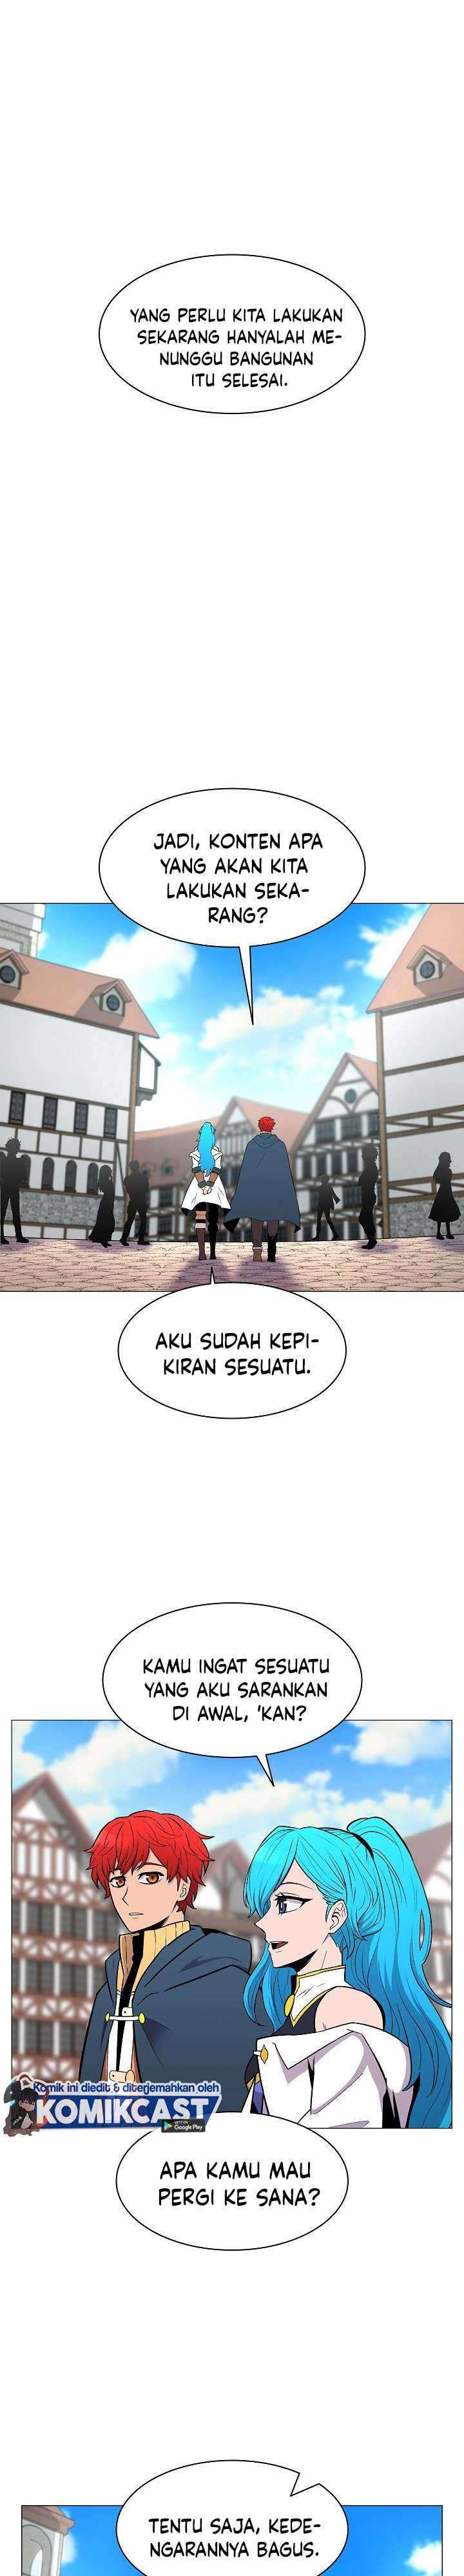 Updater Chapter 28